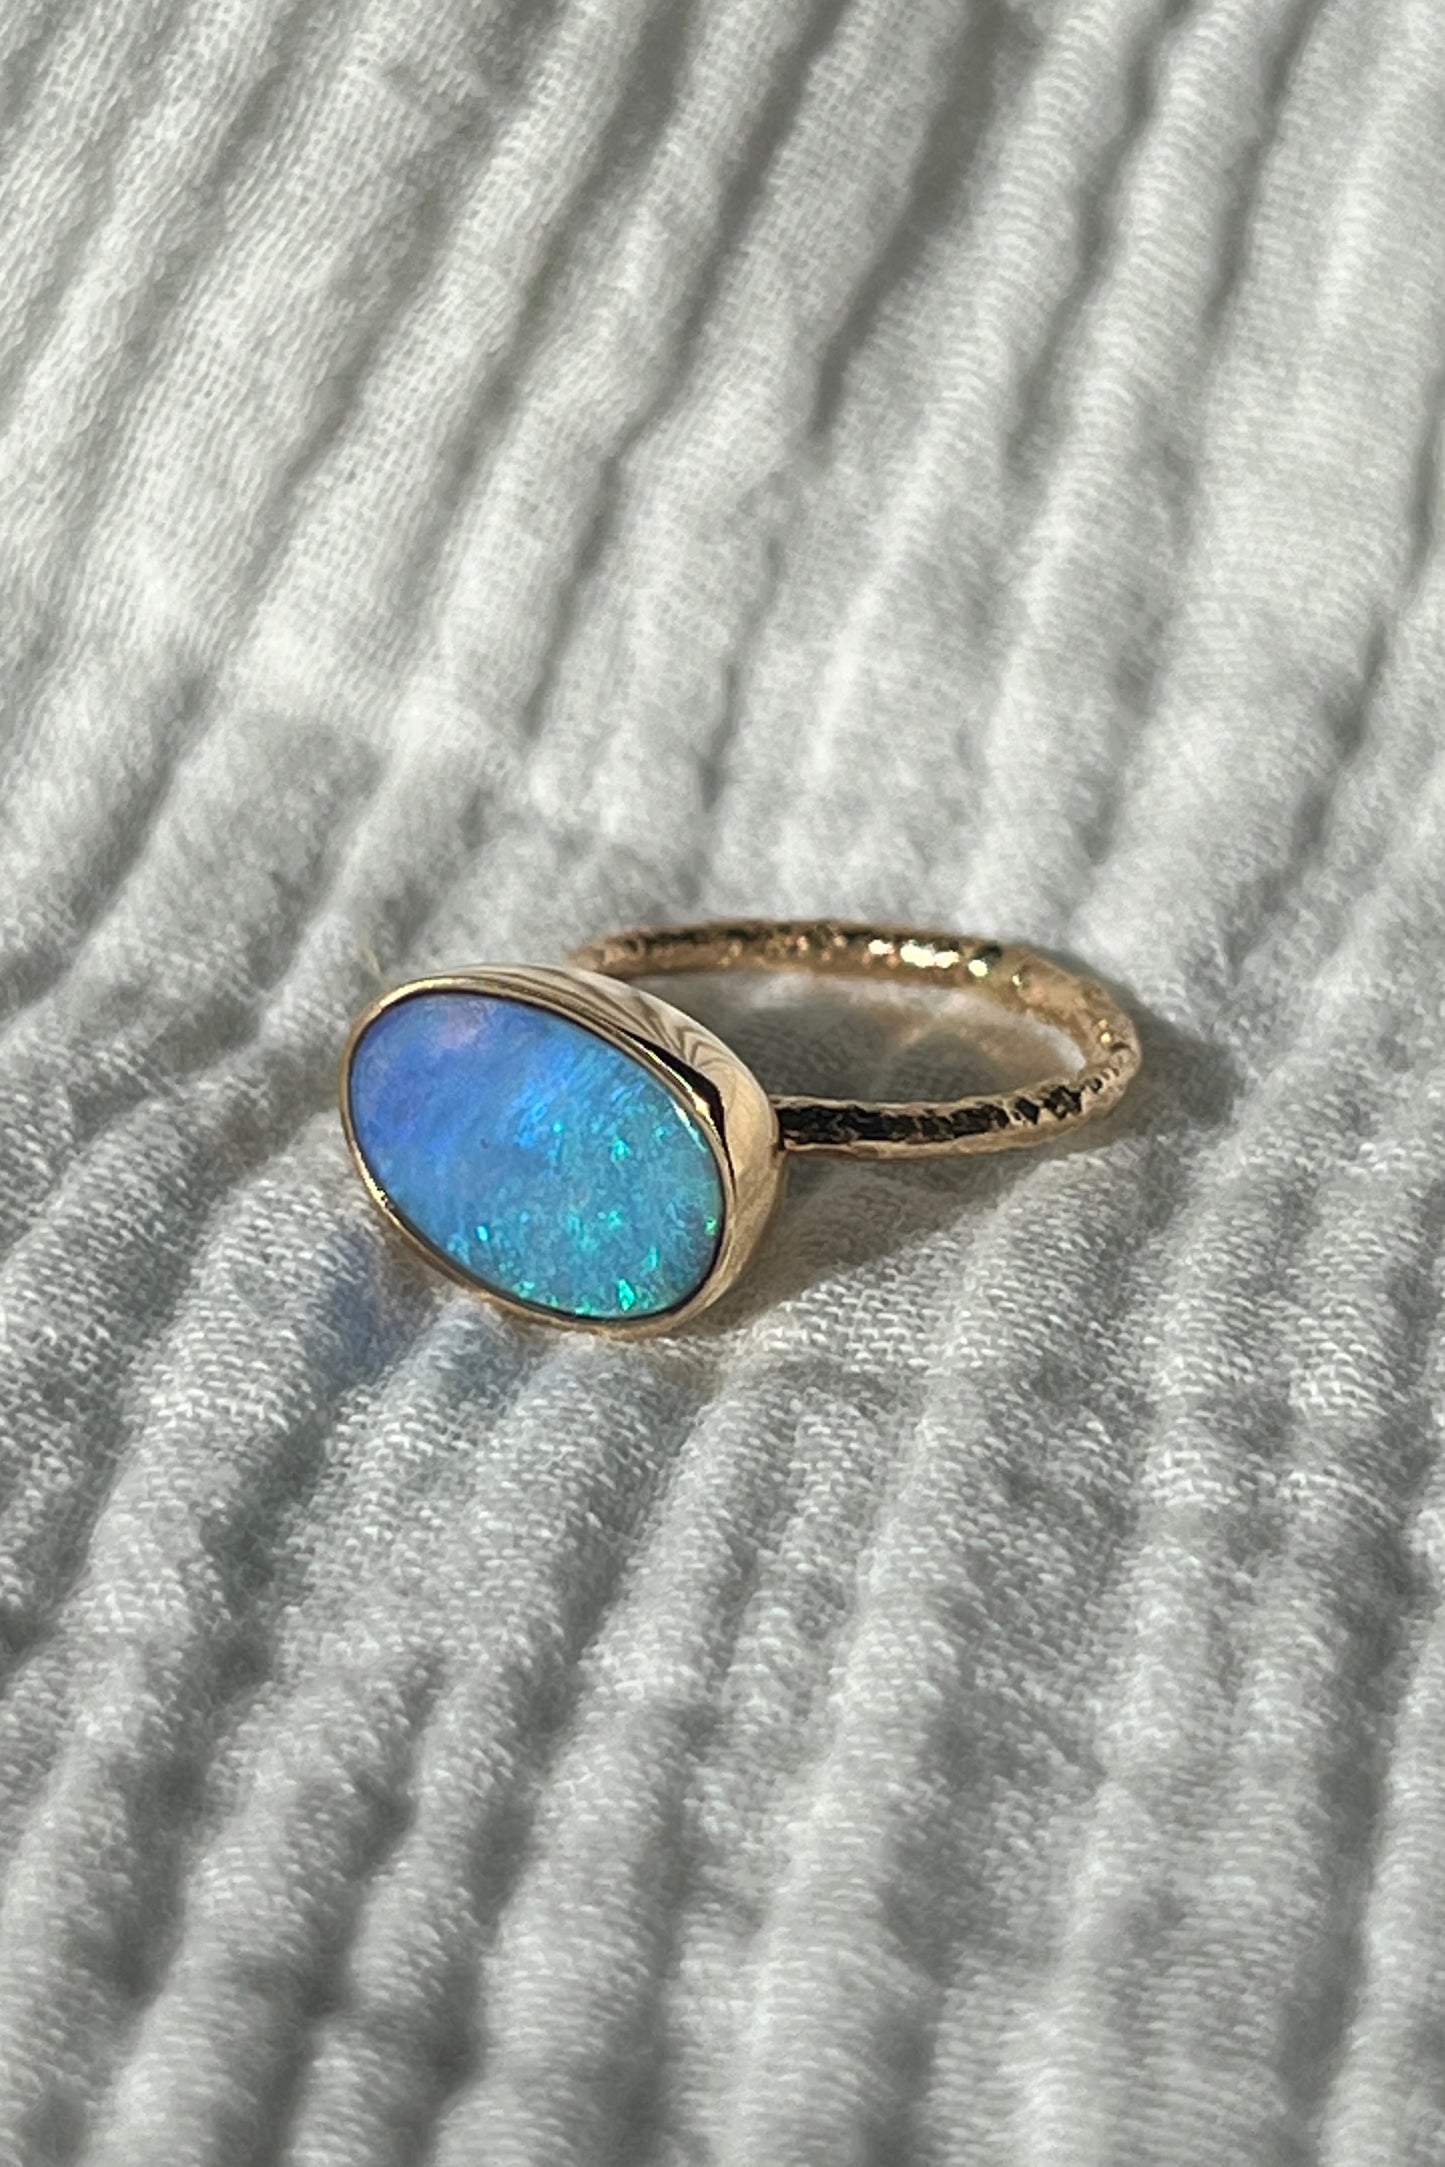 Airy Heights Design - Opal Pod Ring With Bermuda Cedar Branch Band: 14k Gold